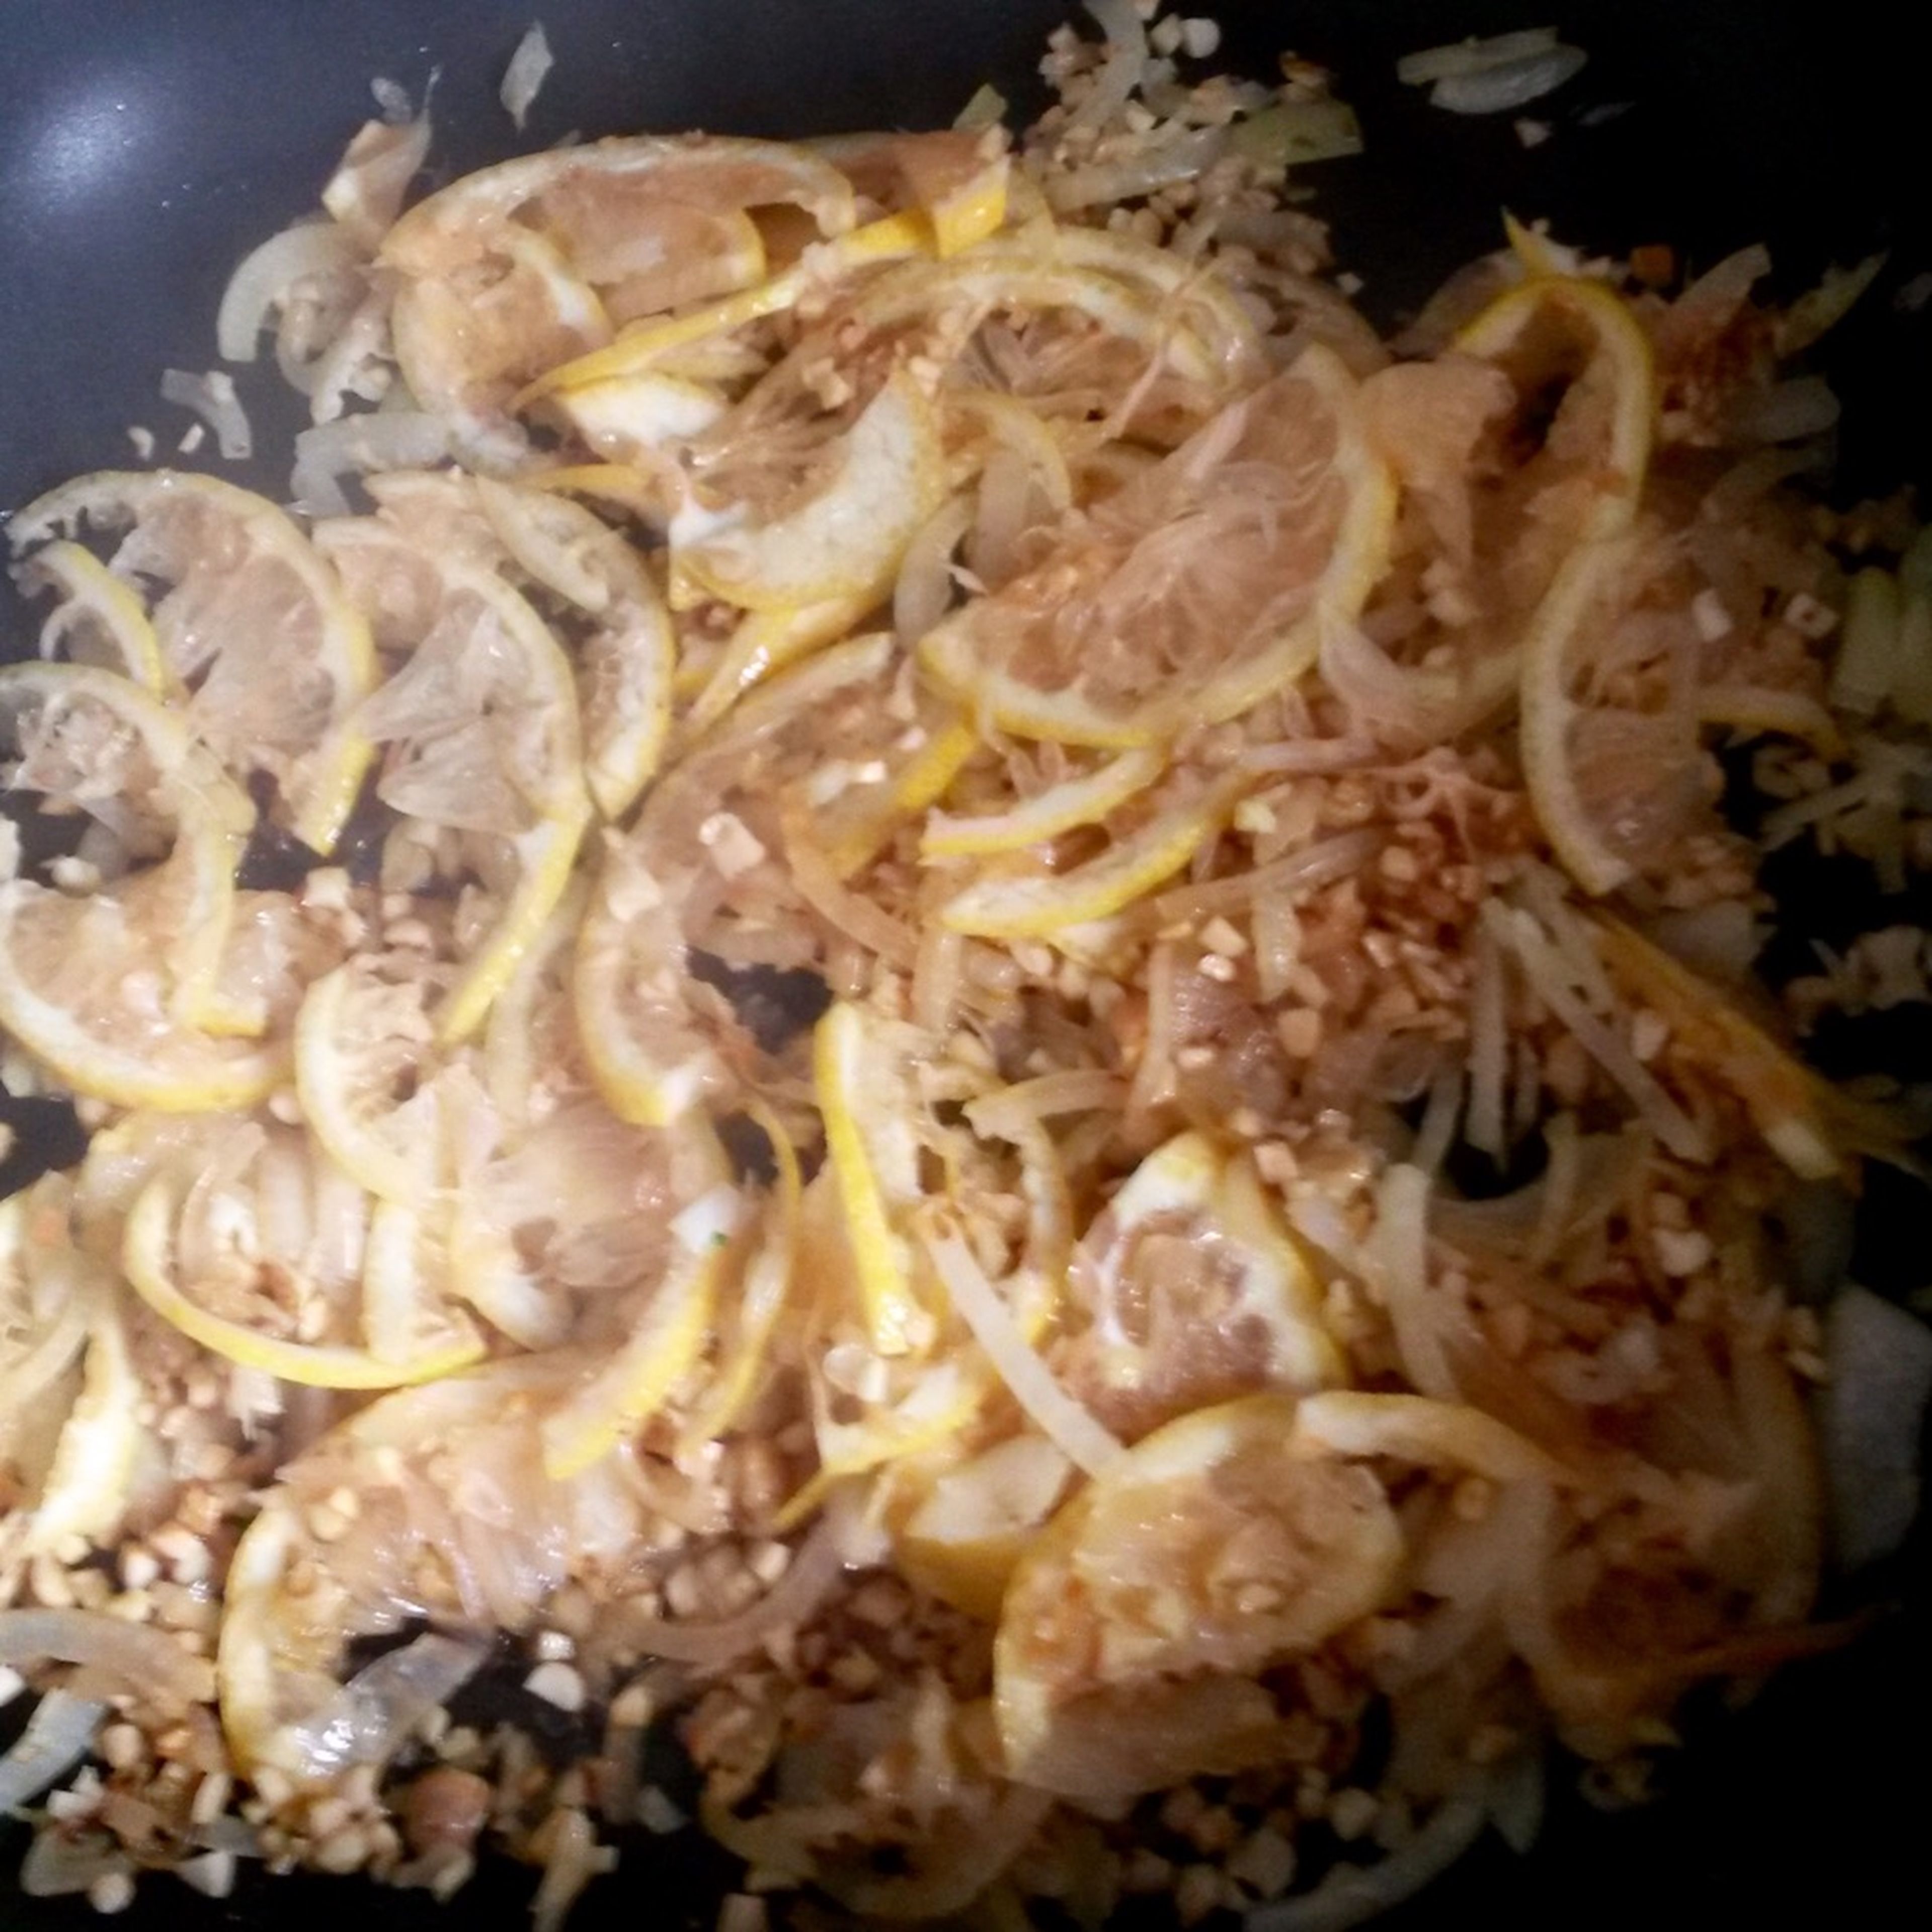 Heat some oil in a pan and fry onions and garlic for approx. 2 min. Add almonds and fry briefly, then add lemon slices and sugar and caramelize for approx. 3 min.